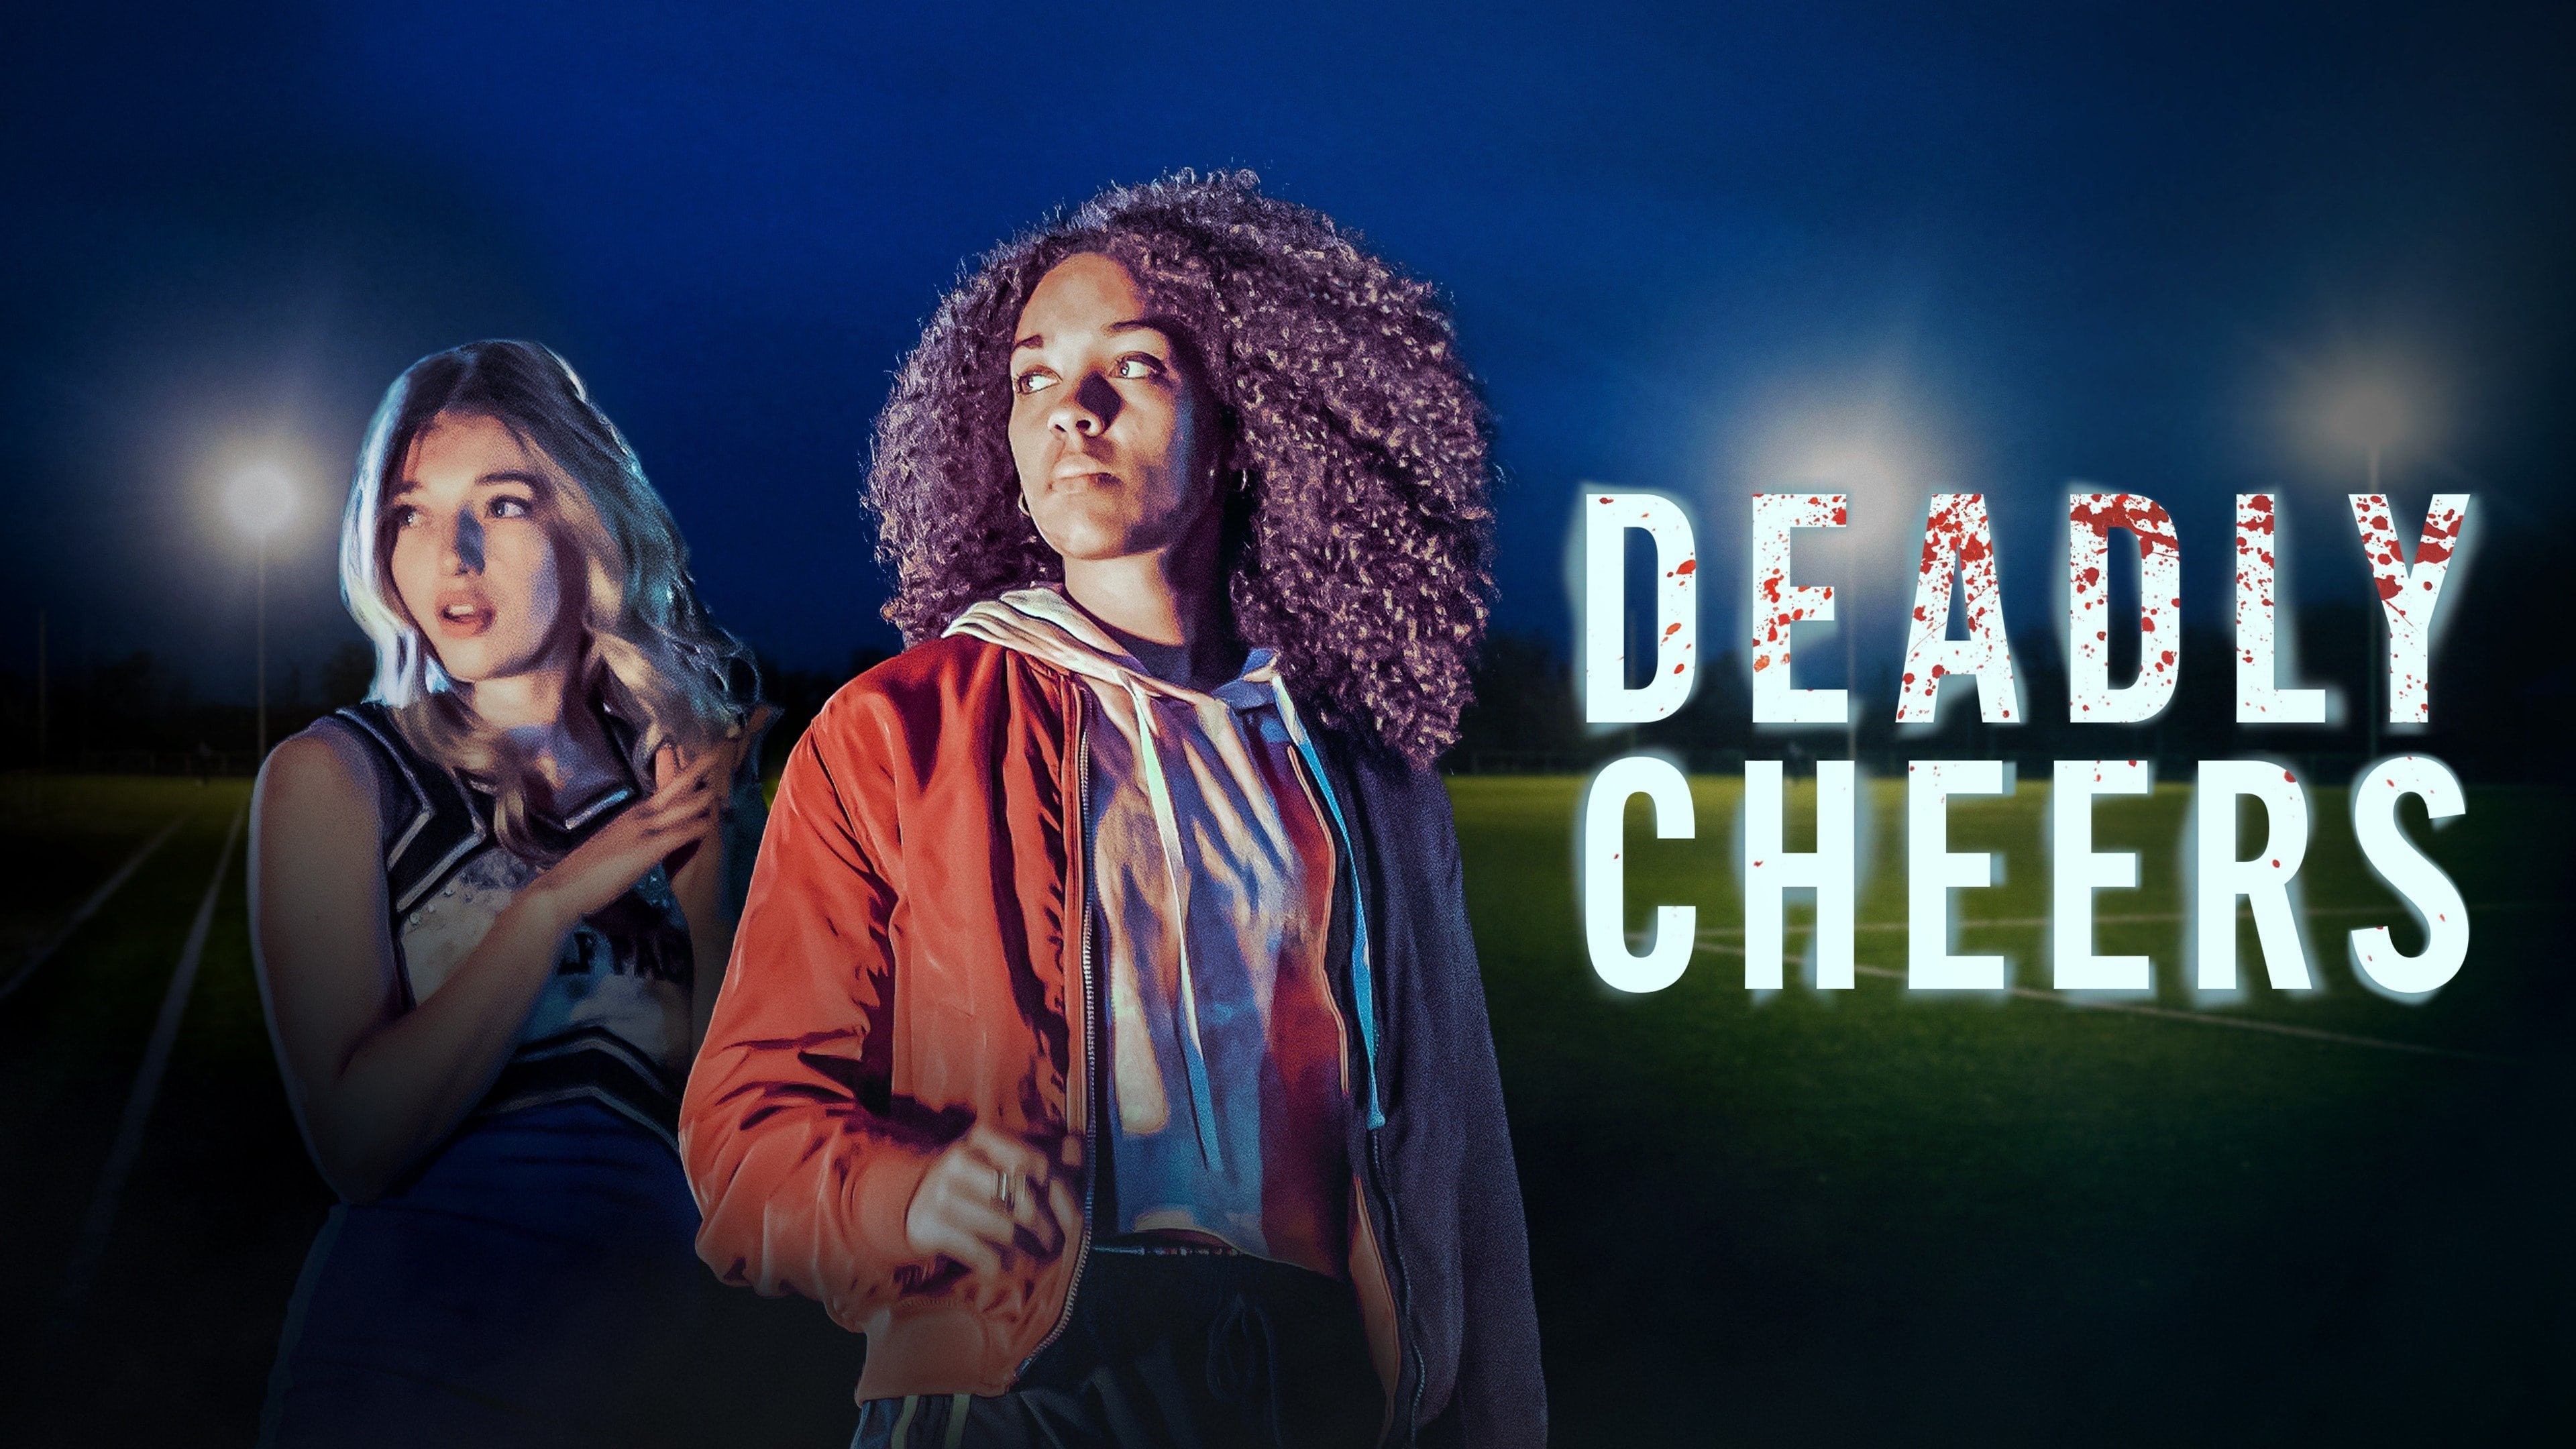 Deadly Cheers (2022)